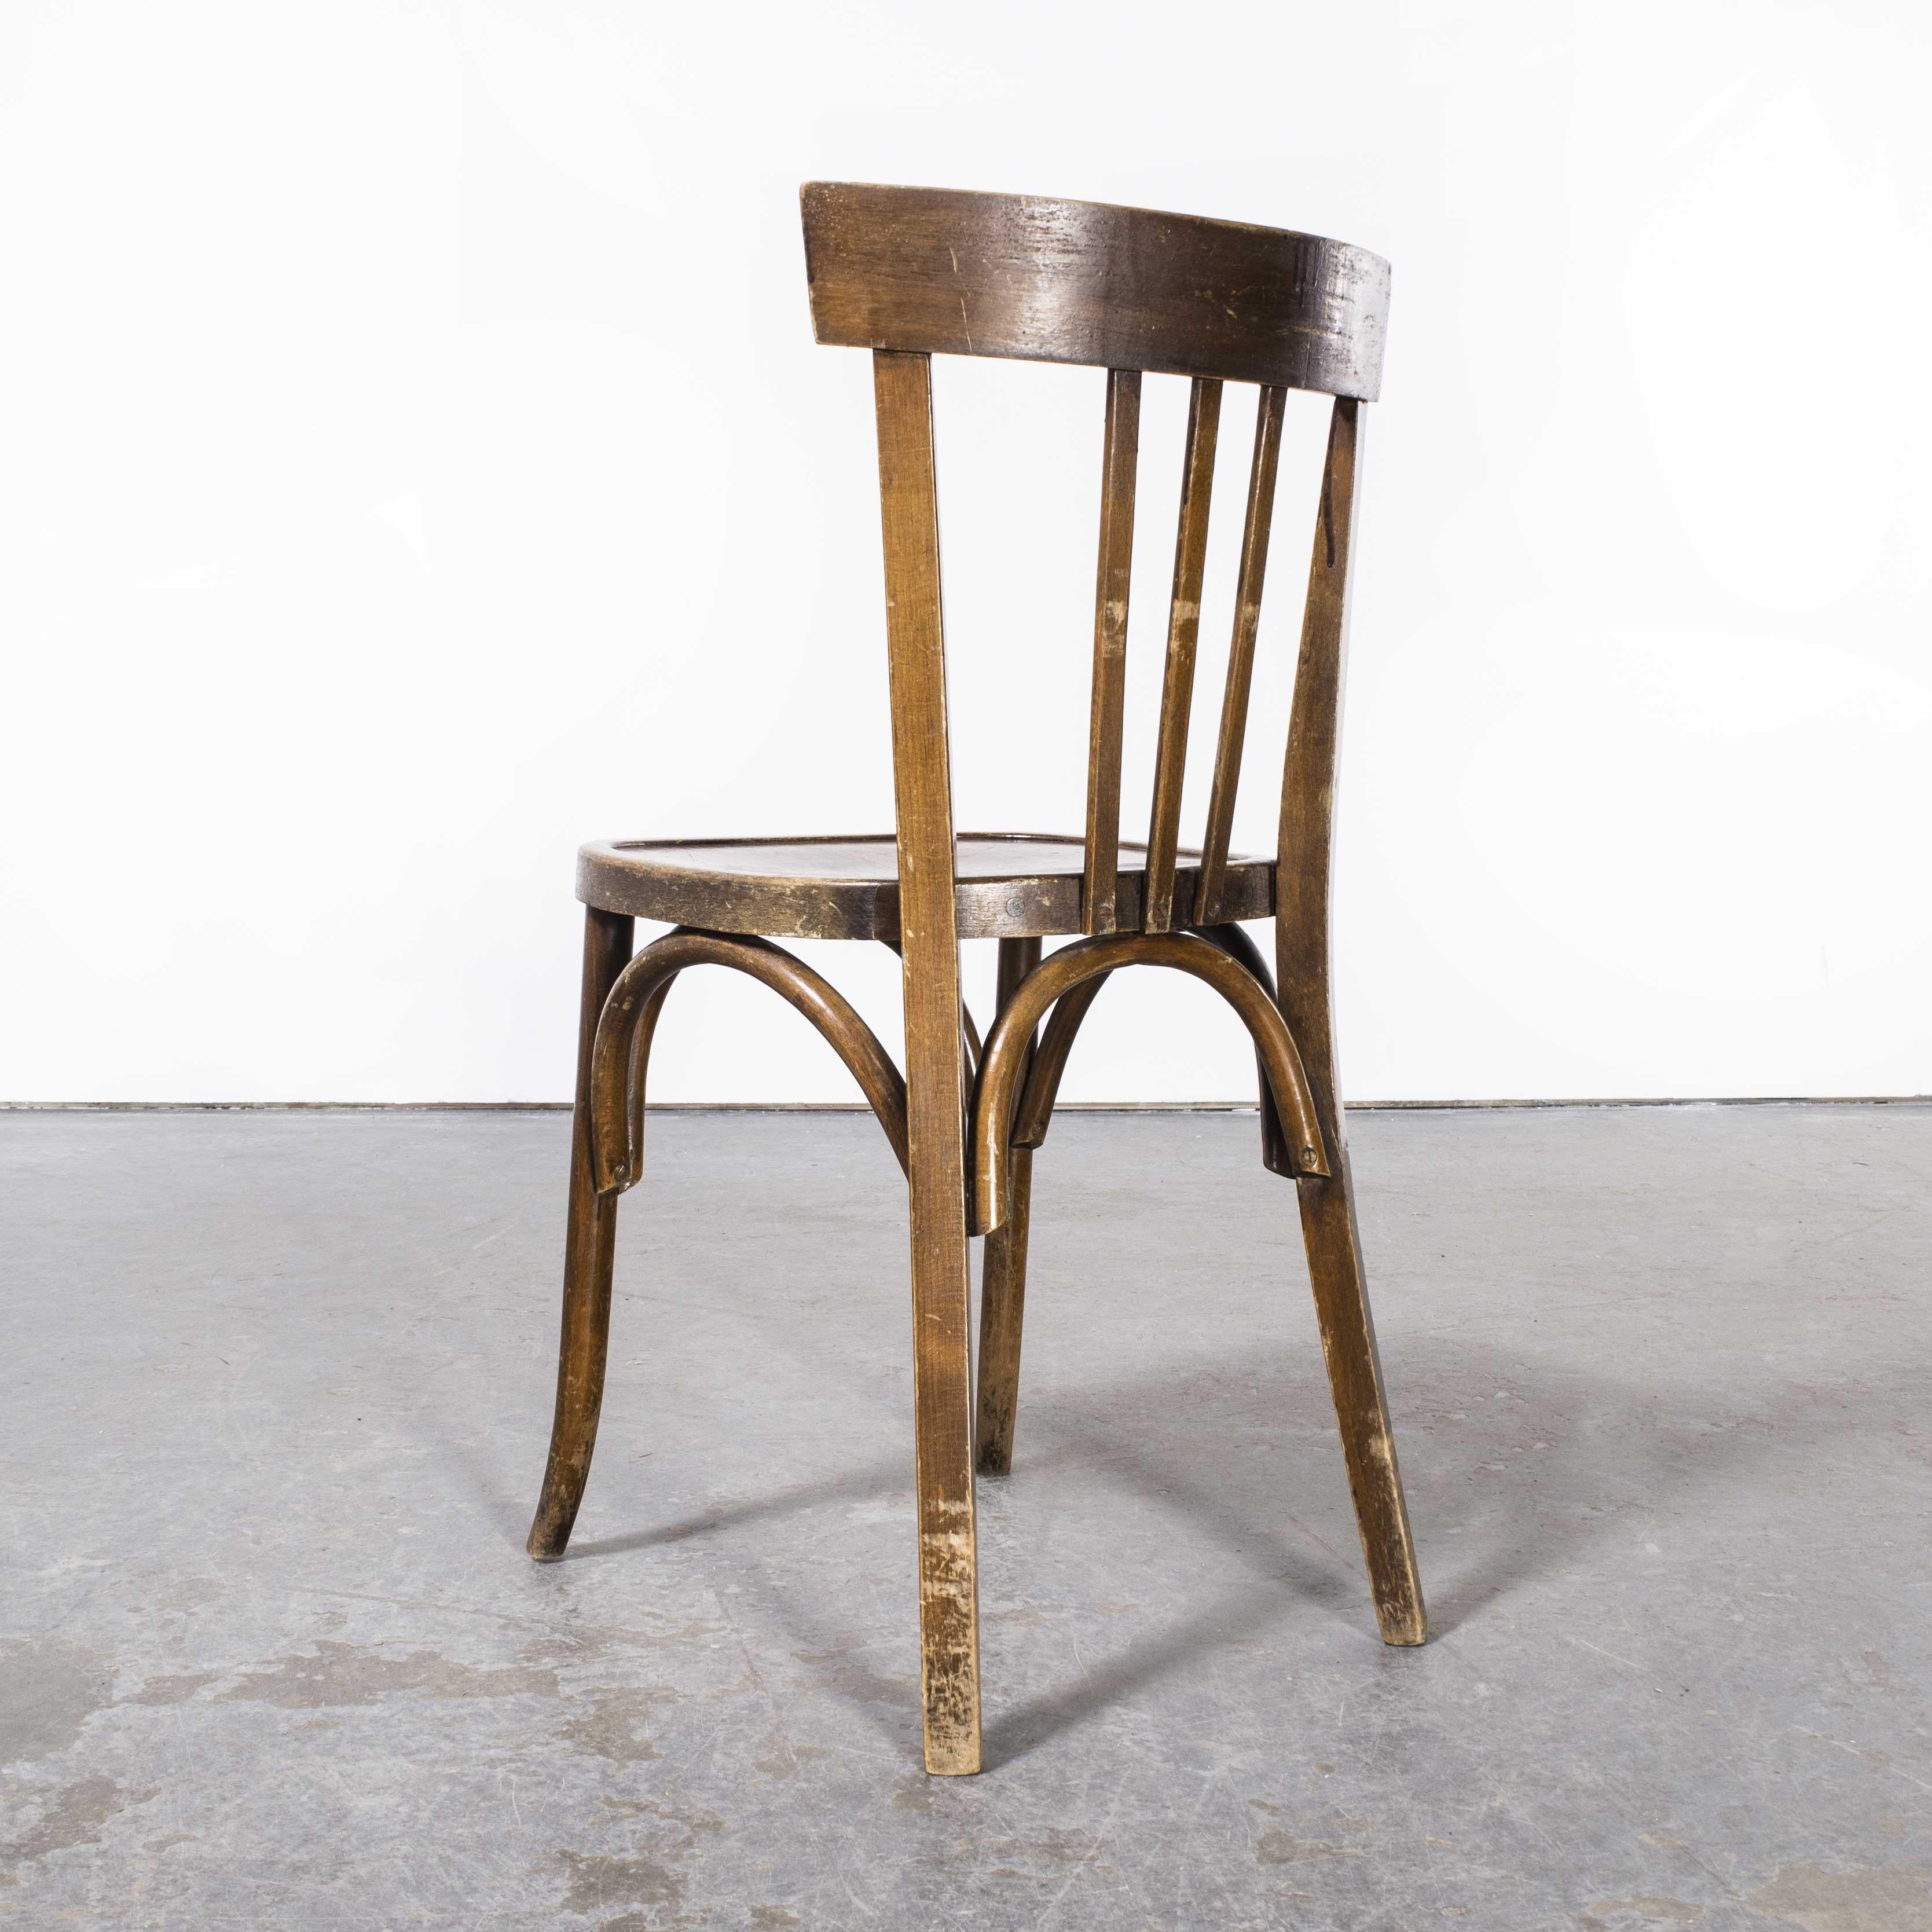 1950’s Mahieu bentwood dark tan dining chairs – set of sixteen
1950’s Mahieu bentwood dark tan dining chairs – set of sixteen. Classic early beech bistro chair made in France by the maker Mahieu. Not much is known of the history of Mahieu except